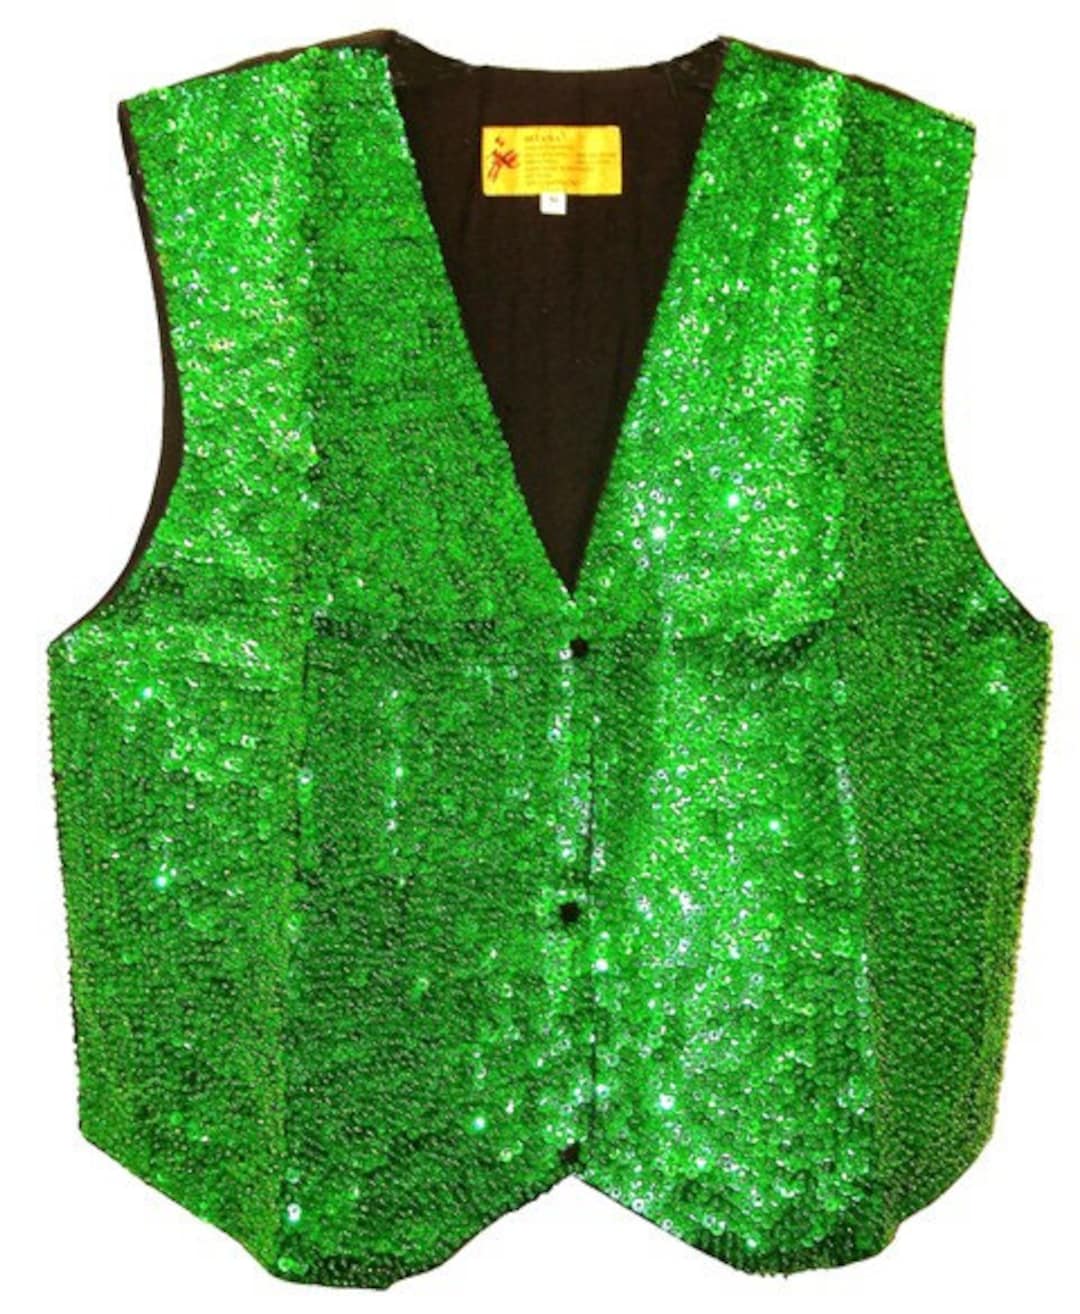 Sequin Vest EMERALD GREEN for Kids up to 6 Year Old Kid - Etsy